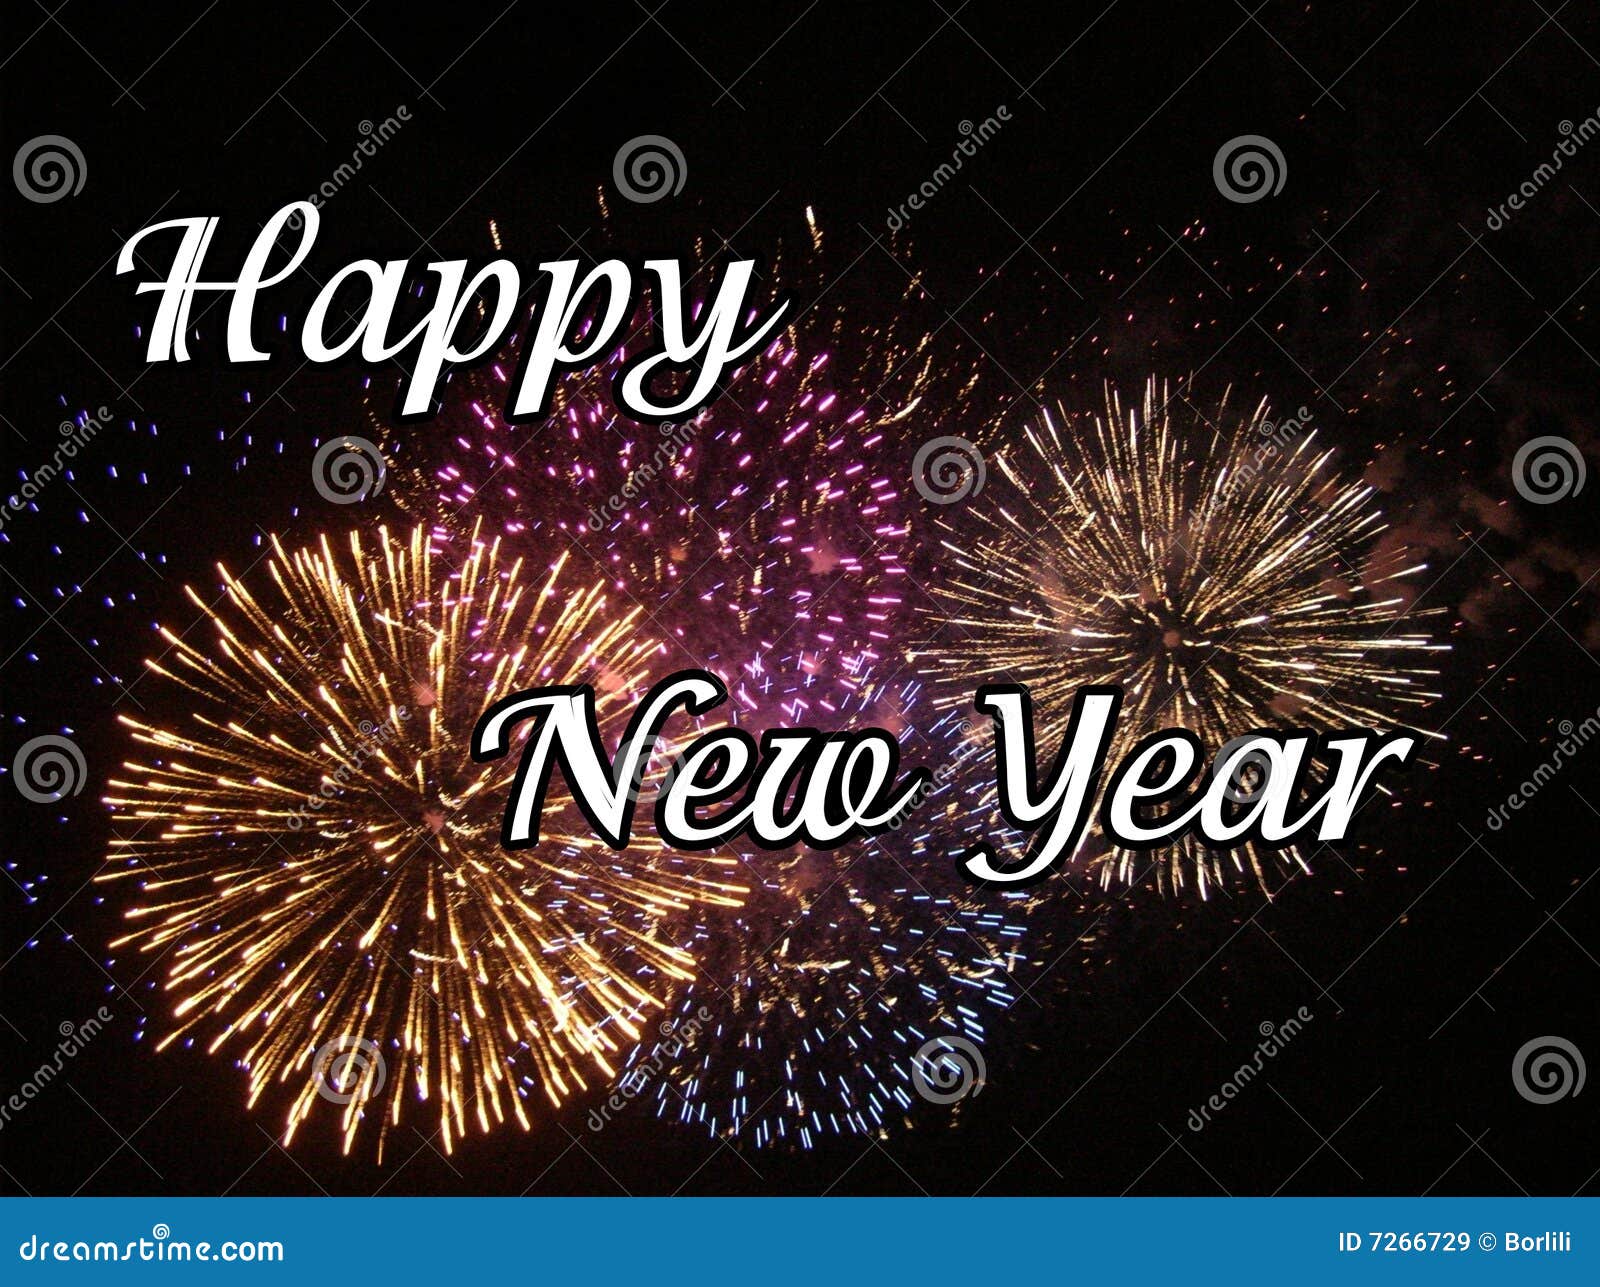 Happy New Year Gift Card With Fireworks Stock Illustration